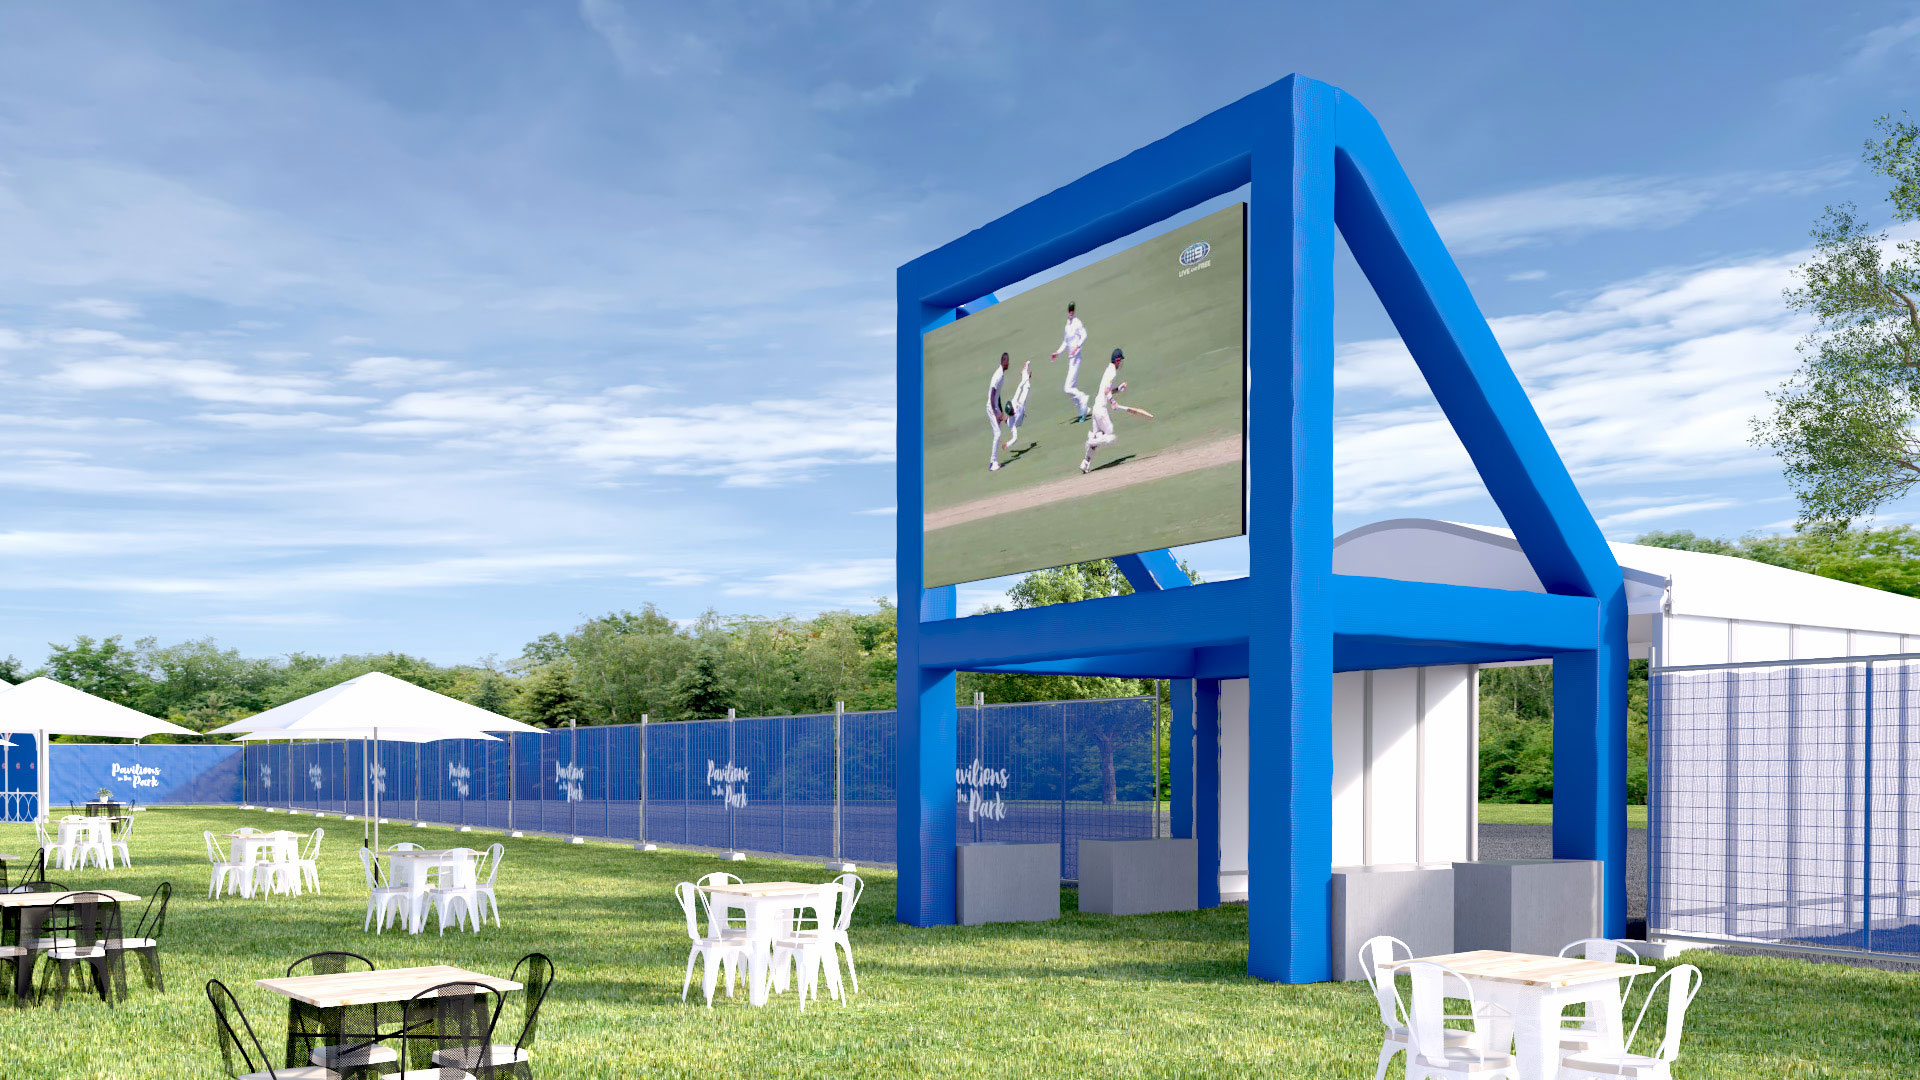 An artist's impression of the hospitality area in Yarra Park for MCC members during the 2017 Boxing Day Test.